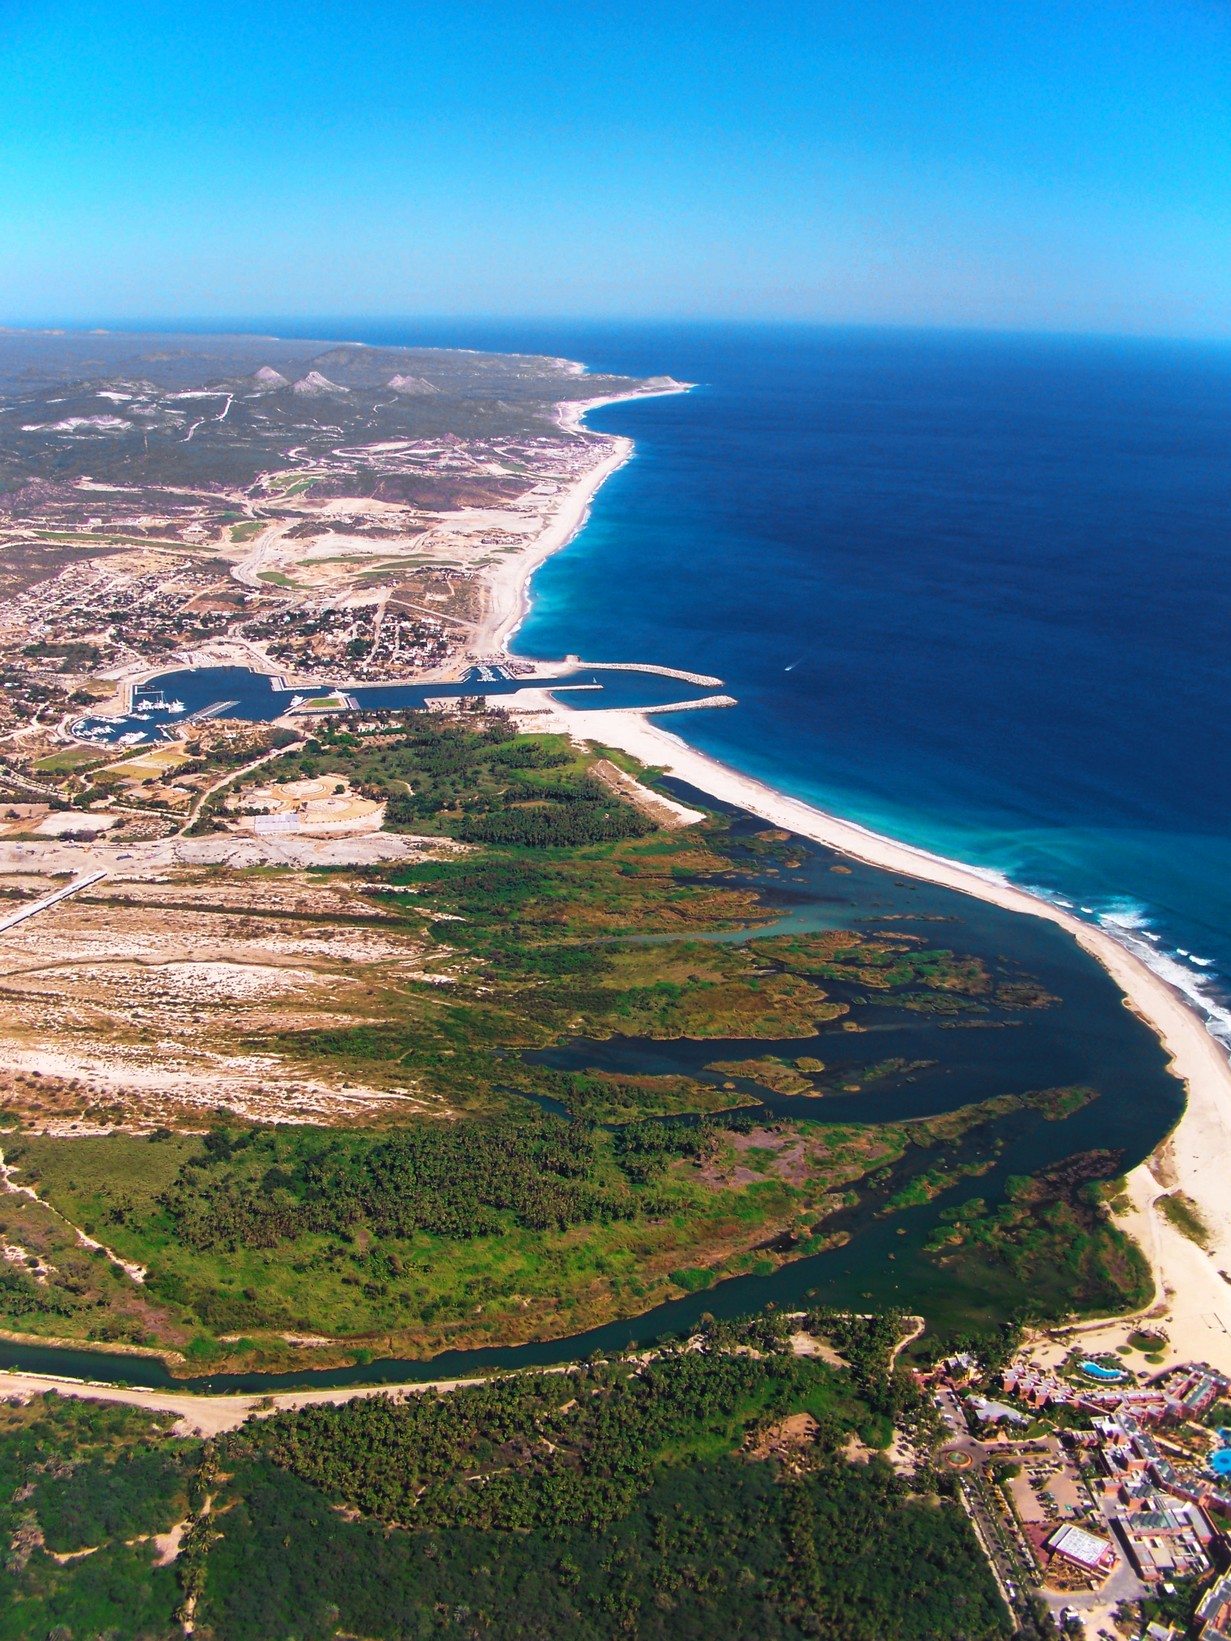 Estuary and East Cape Beach San Jose del Cabo from the air